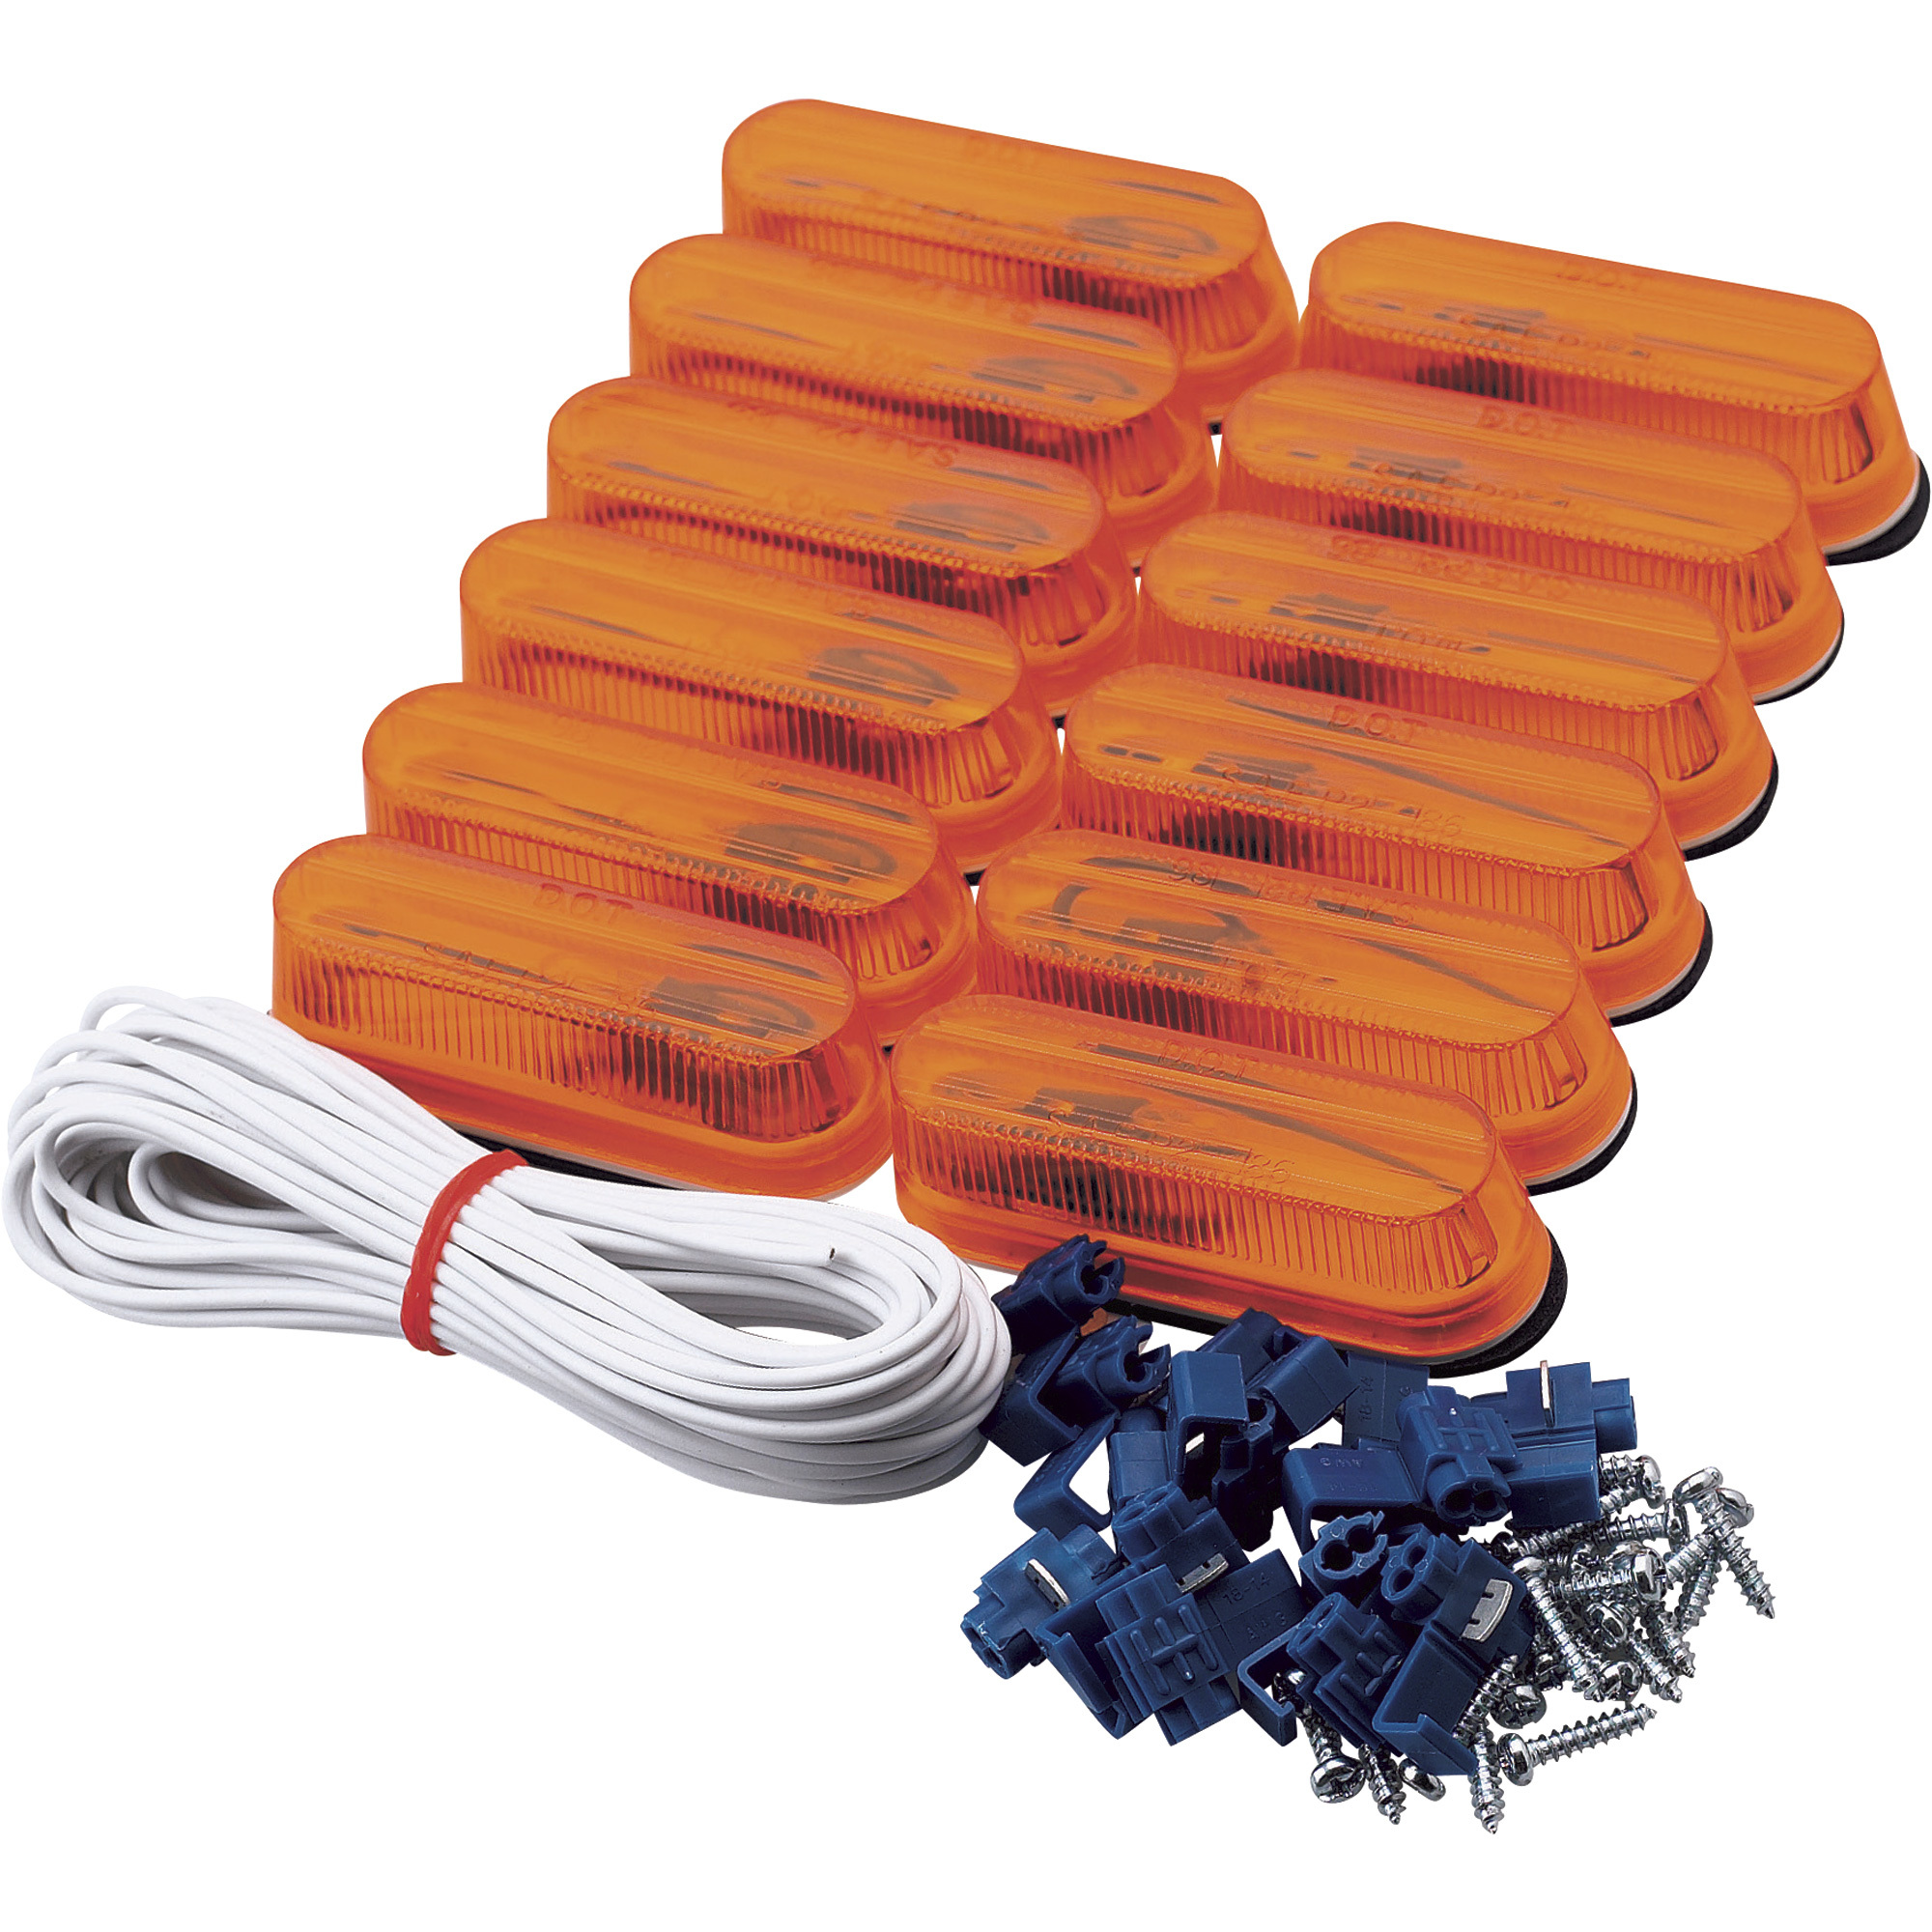 Hopkins Towing Solutions Incandescent Oval Clearance and Side Marker Kit â 12-Pack, Model C487CAK